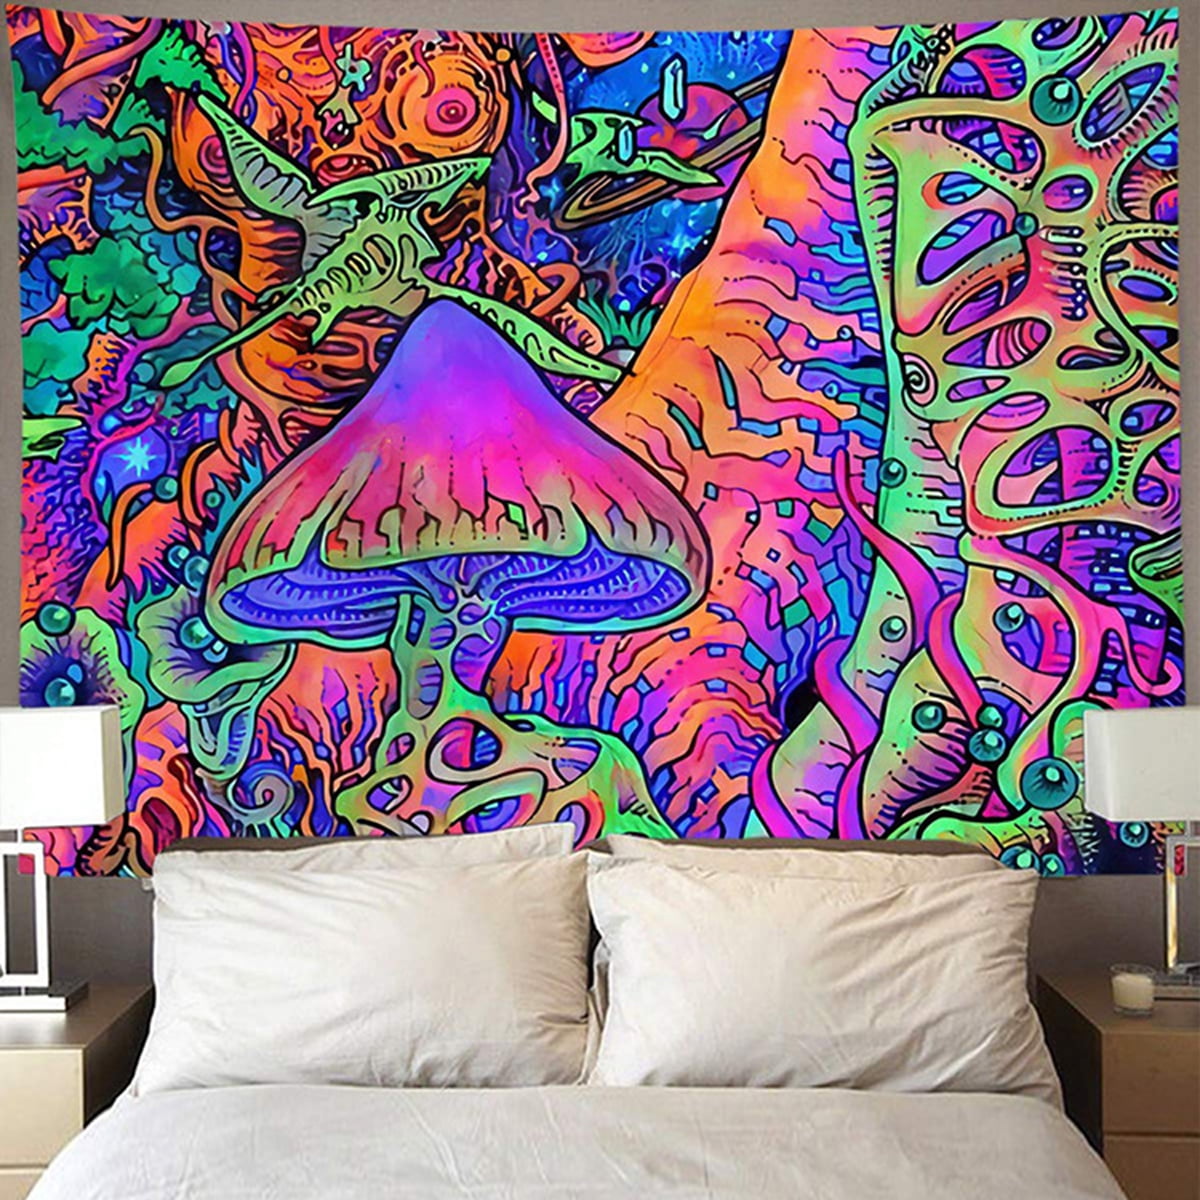 Wall Tapestry Psychedelic Trippy Hippie Tapestry Wall Hanging Colorful Mushroom Forest Rectangular Art Decor Print Fabric for Living Room Bedroom 59 x 79 